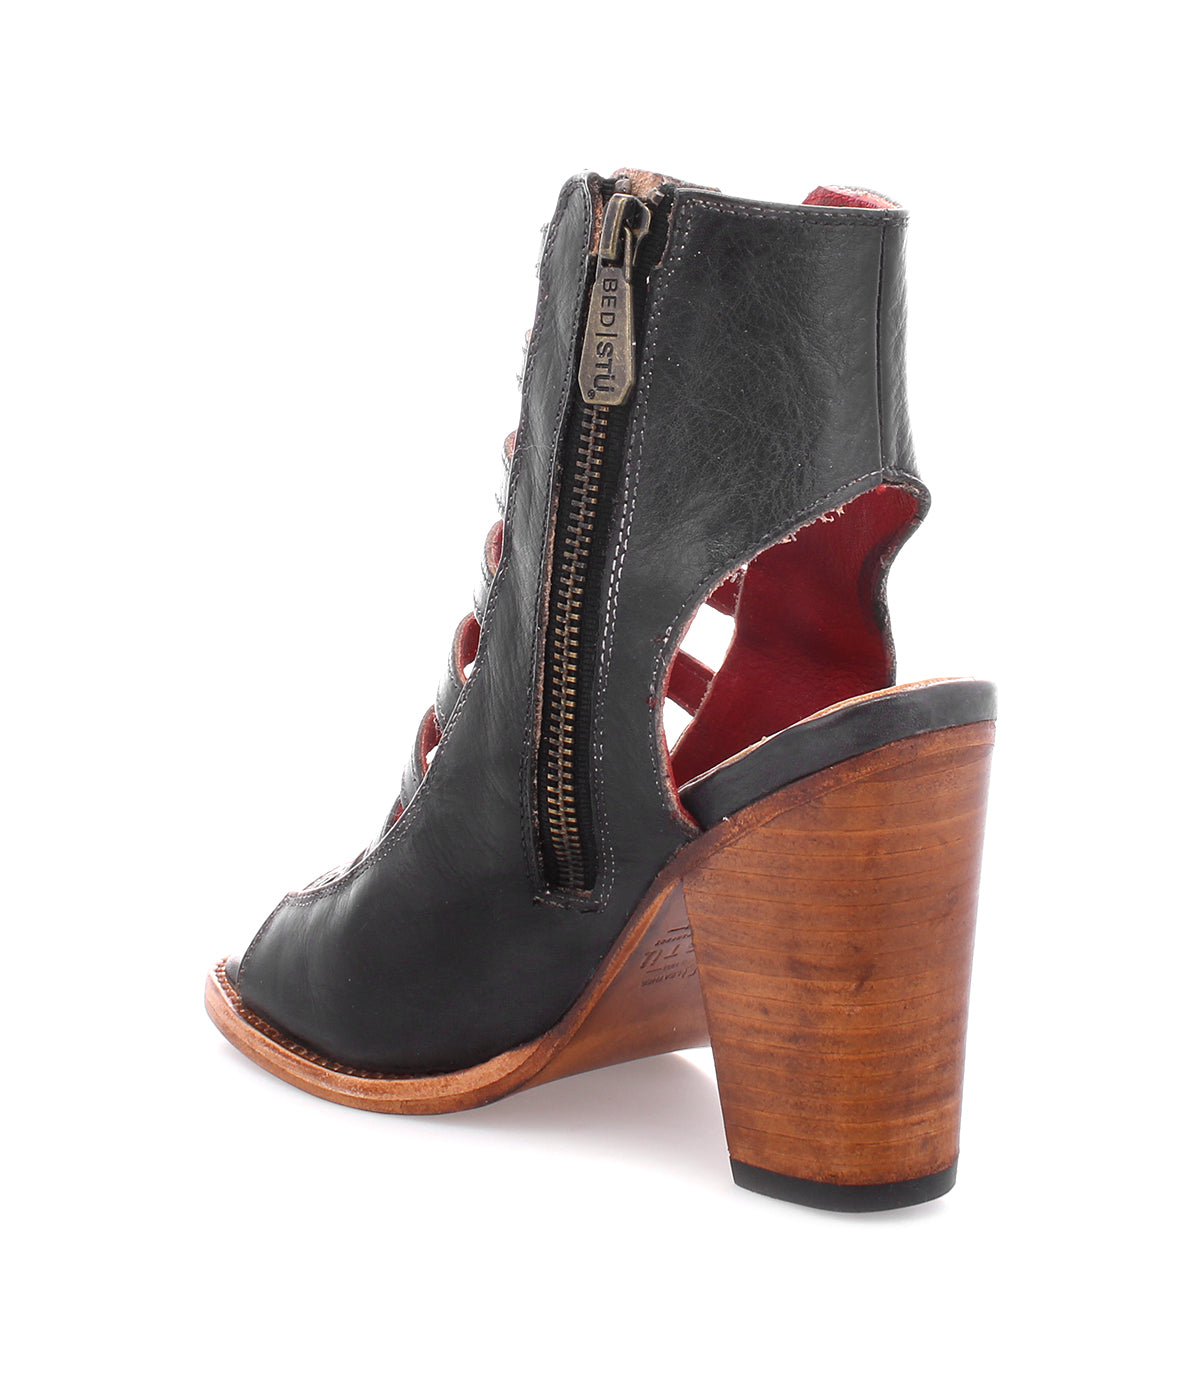 A cushioned footbed enhances the comfort of this Bed Stu Occam boot with a wooden heel.